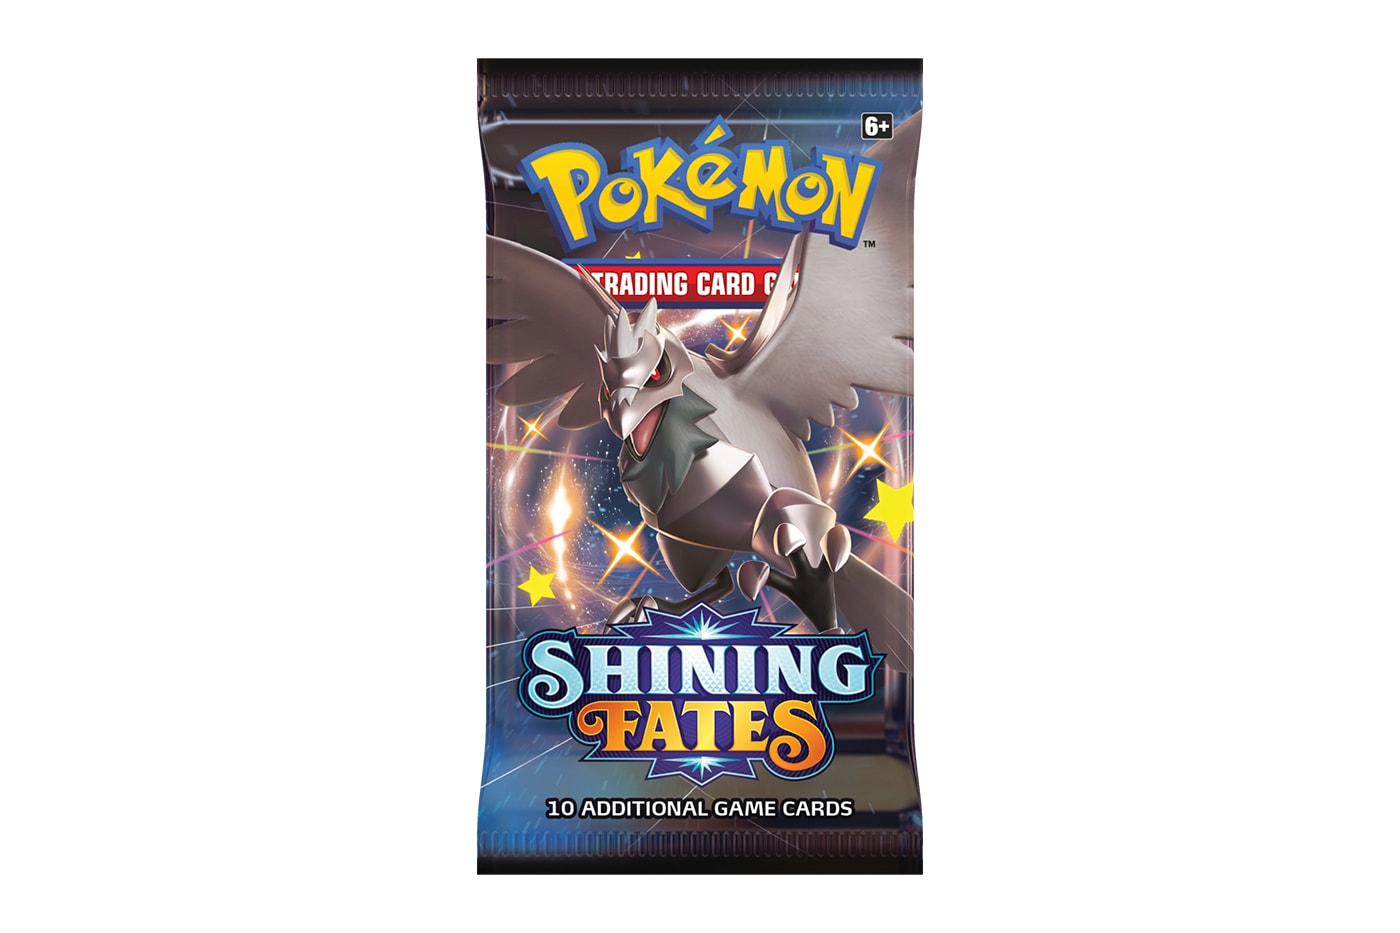 Pokémon Trading Card Game Shining Fates Expansion News Charizard Vmax V pikachu TCG Gaming collection collectors cards pokemon center